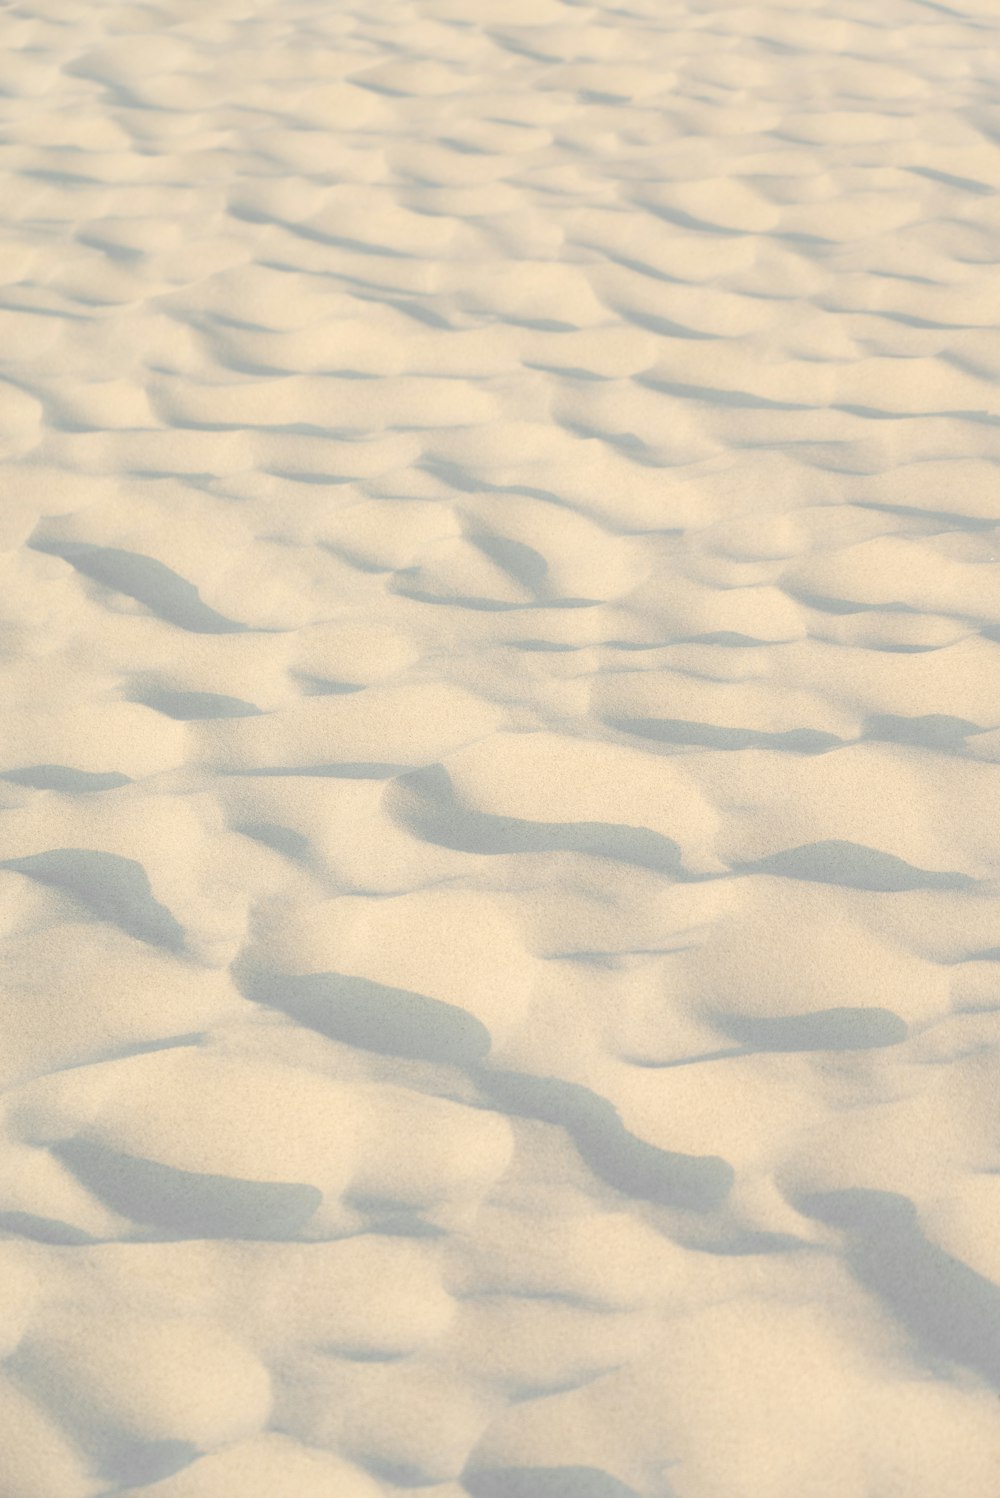 white sand with white sand